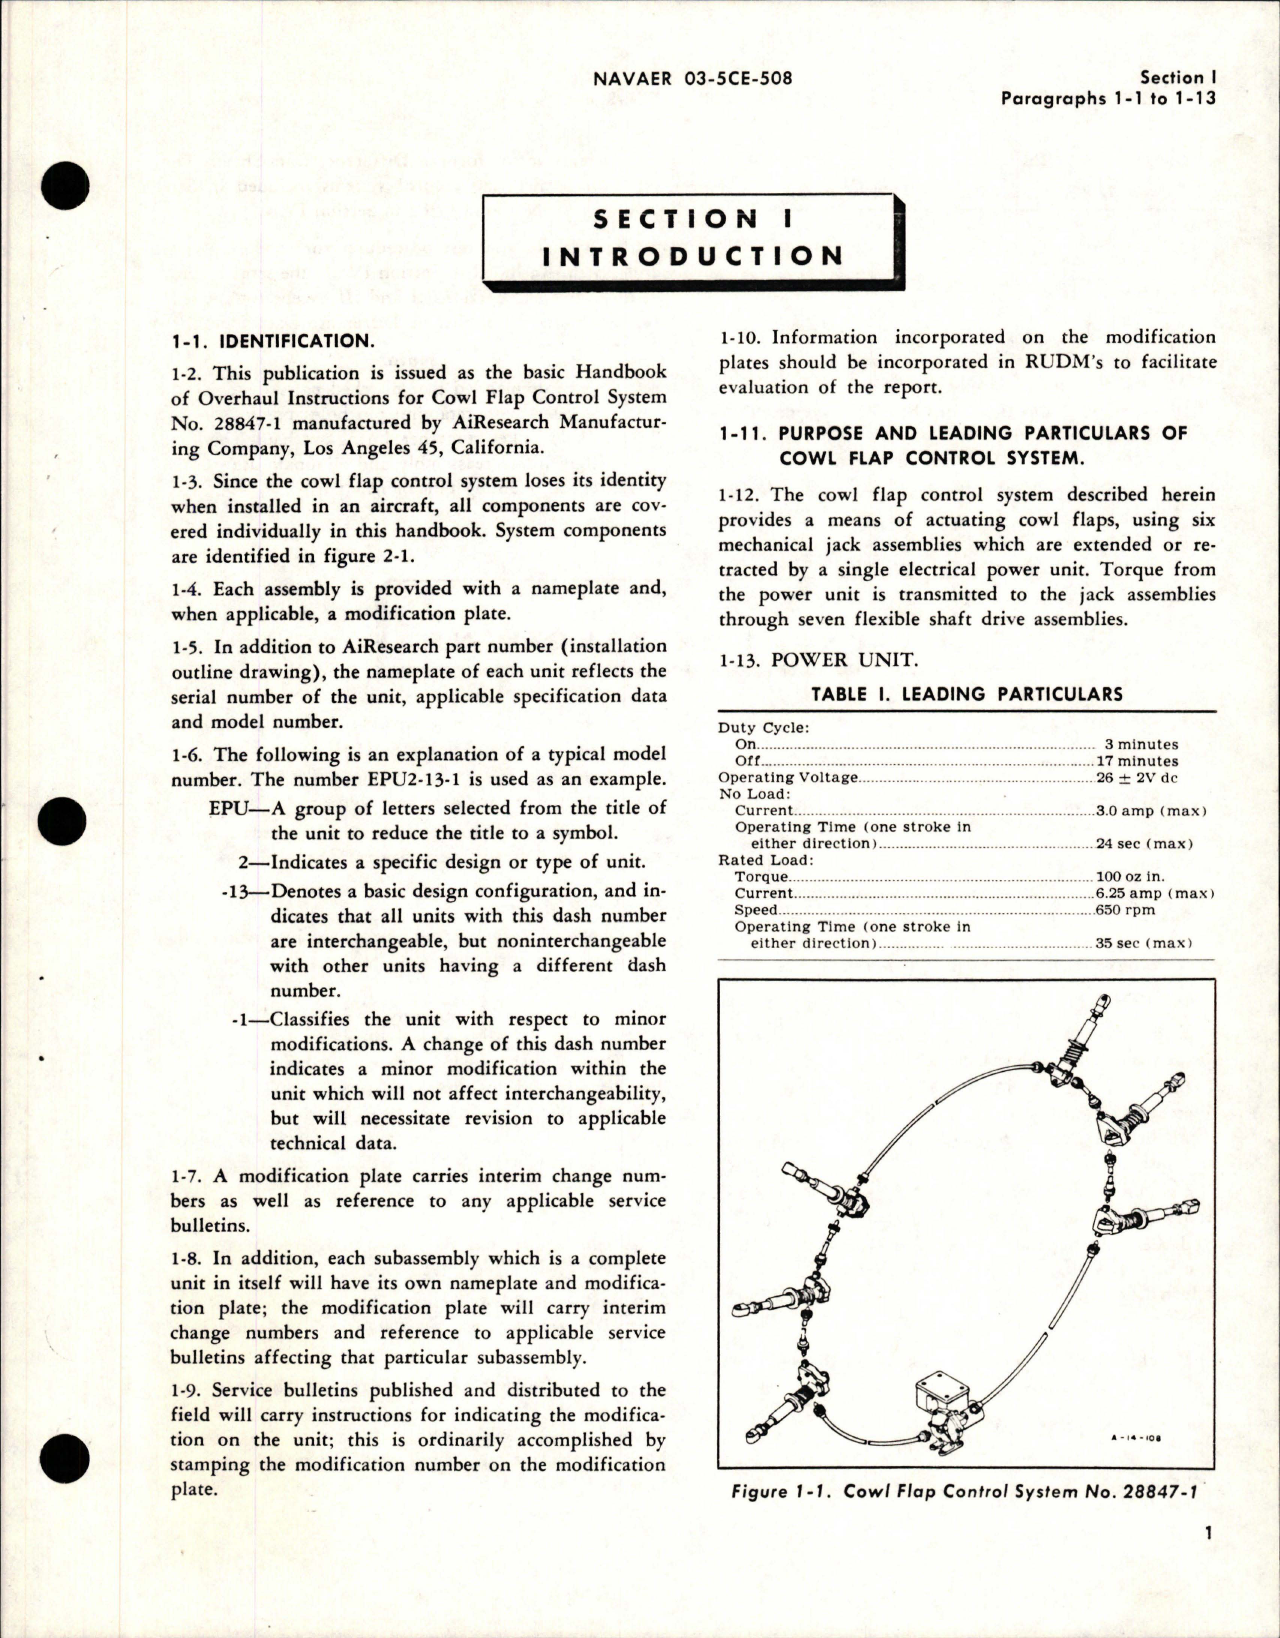 Sample page 5 from AirCorps Library document: Overhaul Instructions for Cowl Flap Control System - Part 28847-1